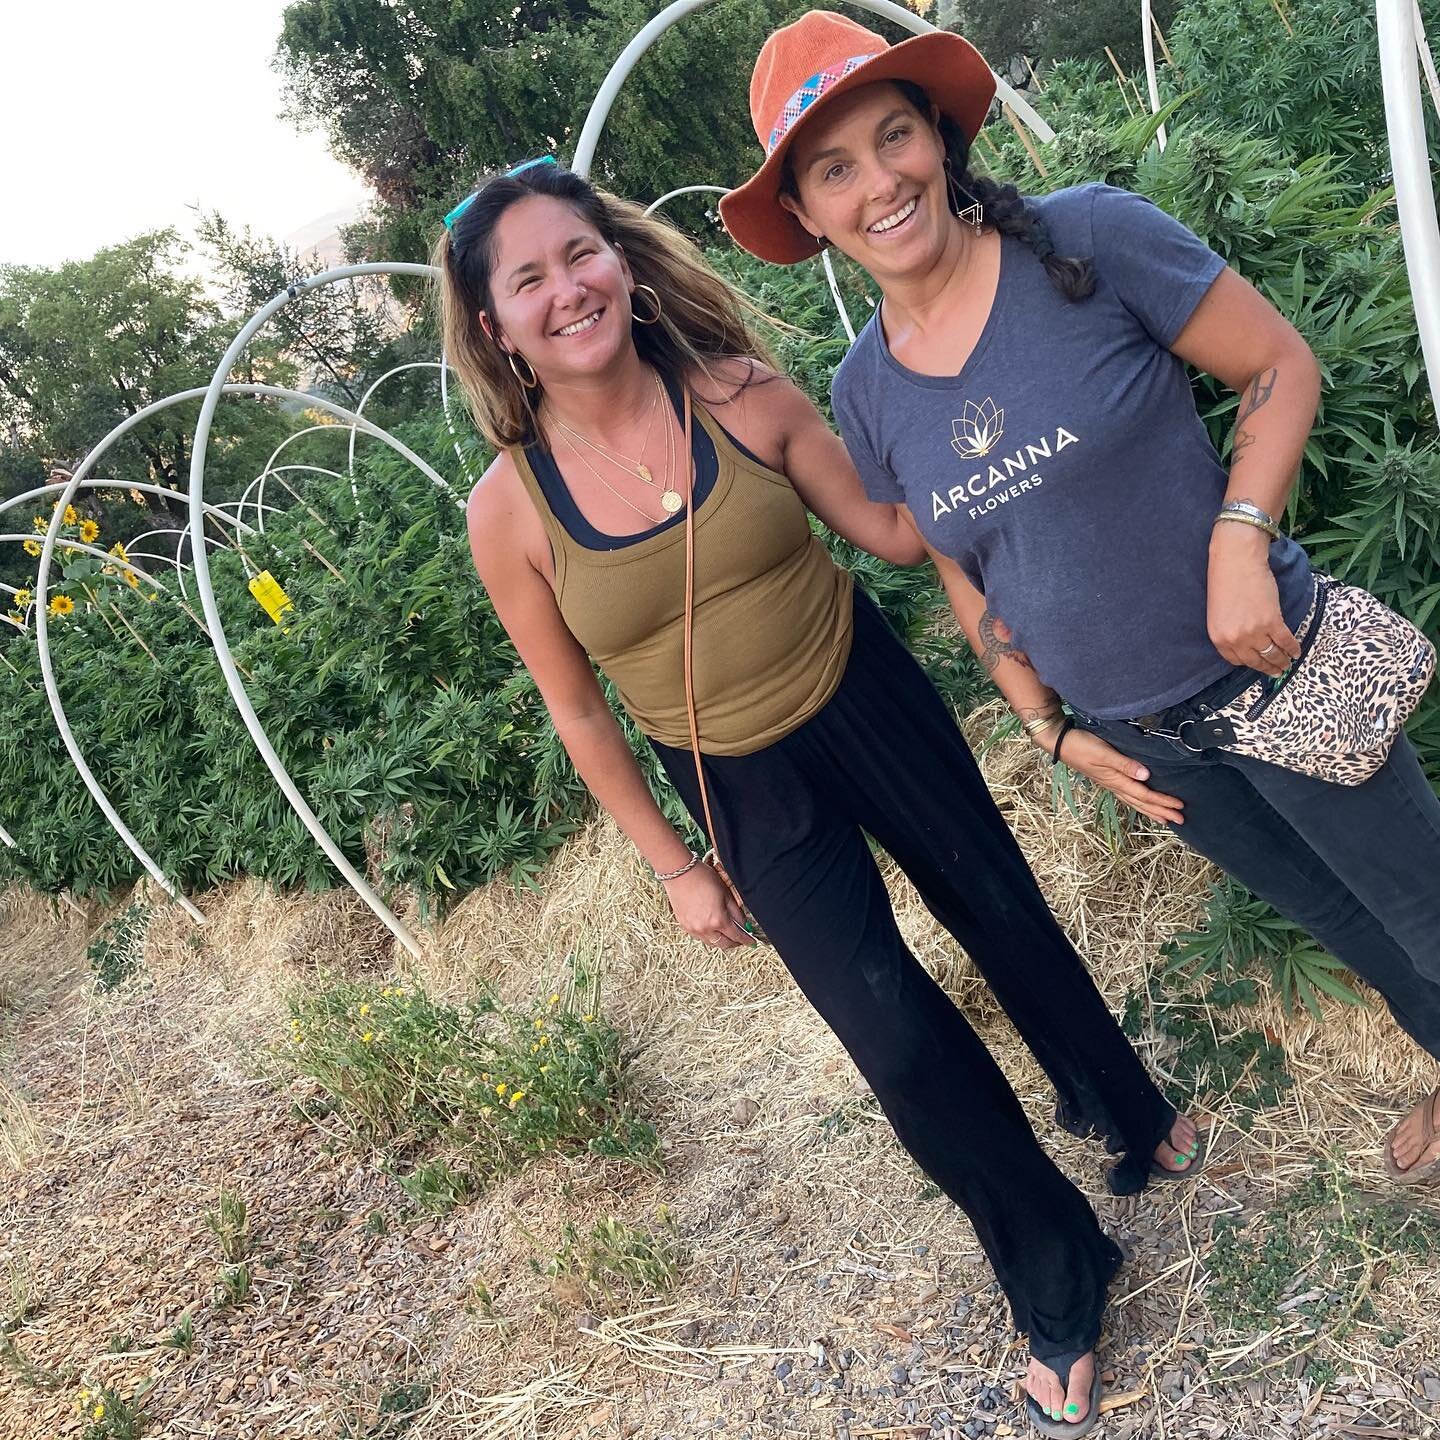 Lovely visit with @emehtleaf with @californialeafmag and @empress.nasha the other evening! Quick tour of the garden in its prime! Thanks for the love!